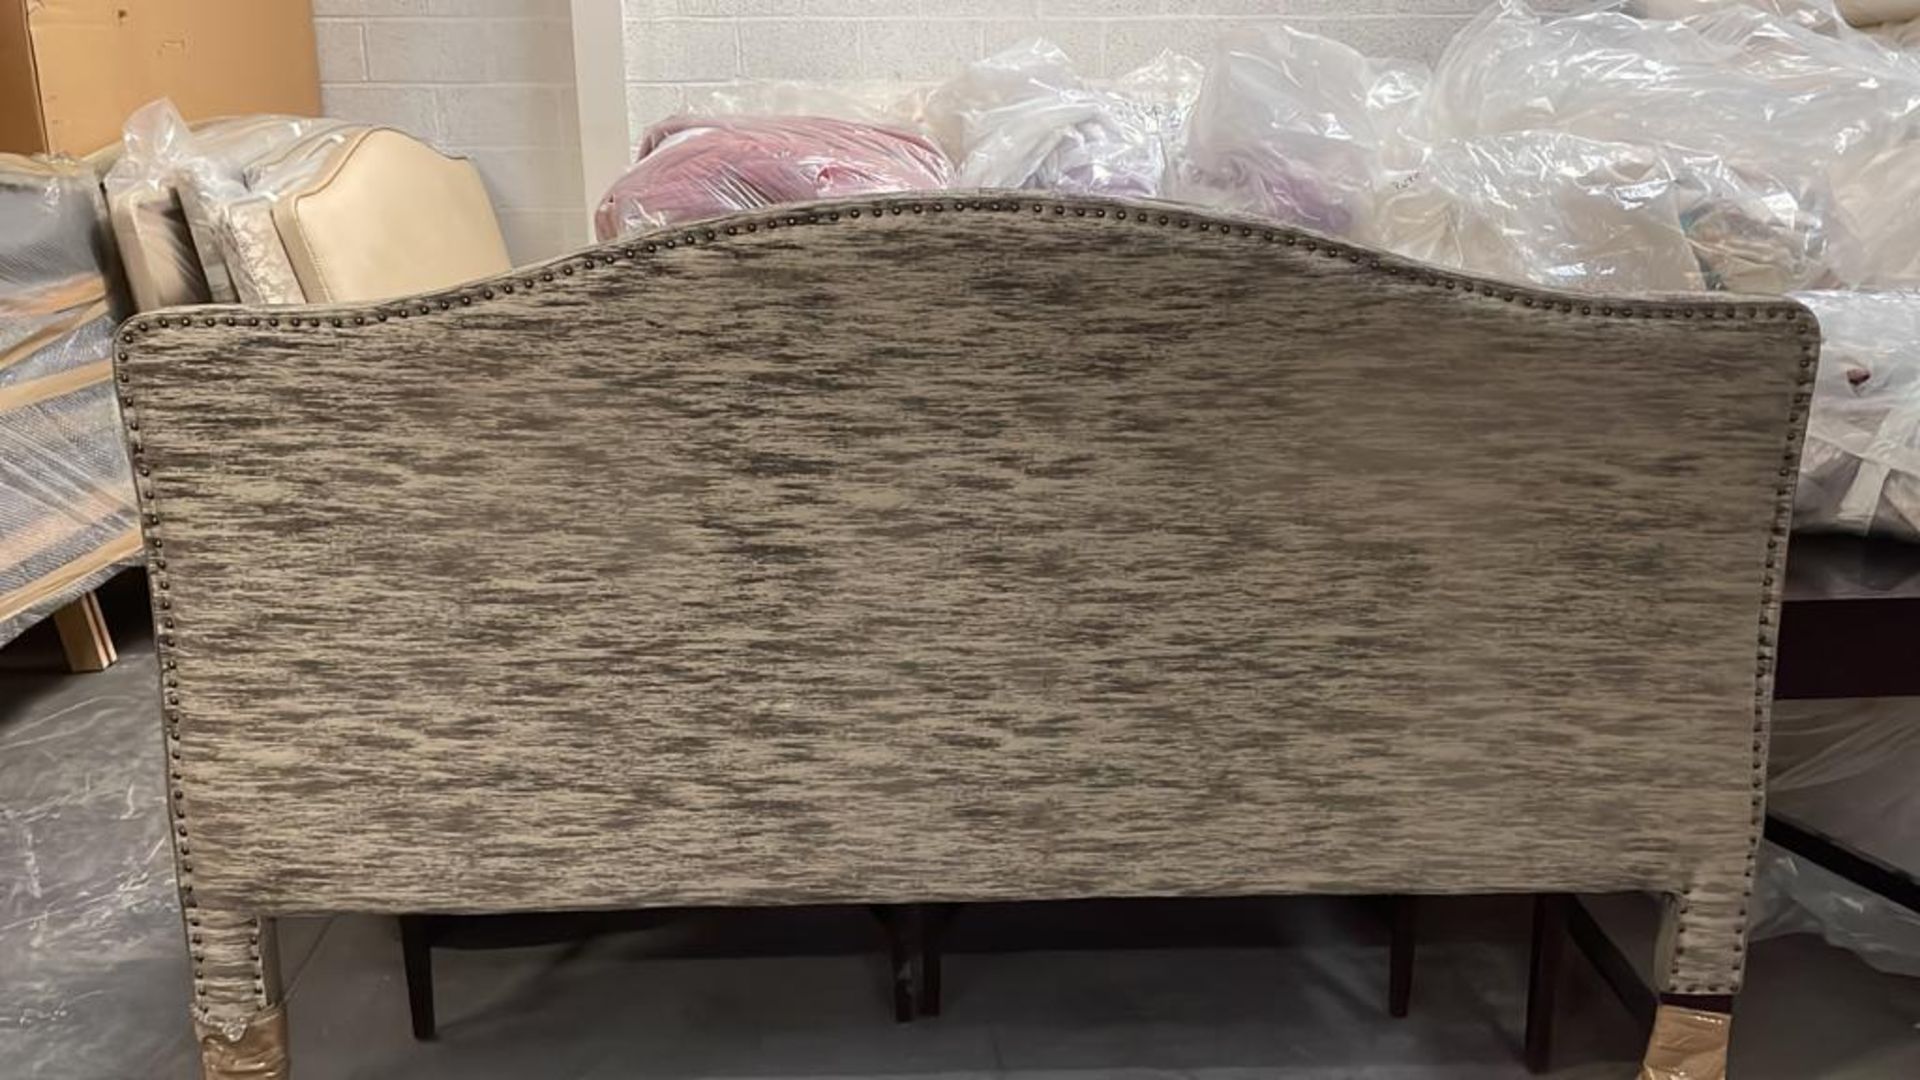 Headboard Handcrafted With Nail Trim And Padded mushroom Upholstery 215 (L) x 132 (H) - Image 2 of 3